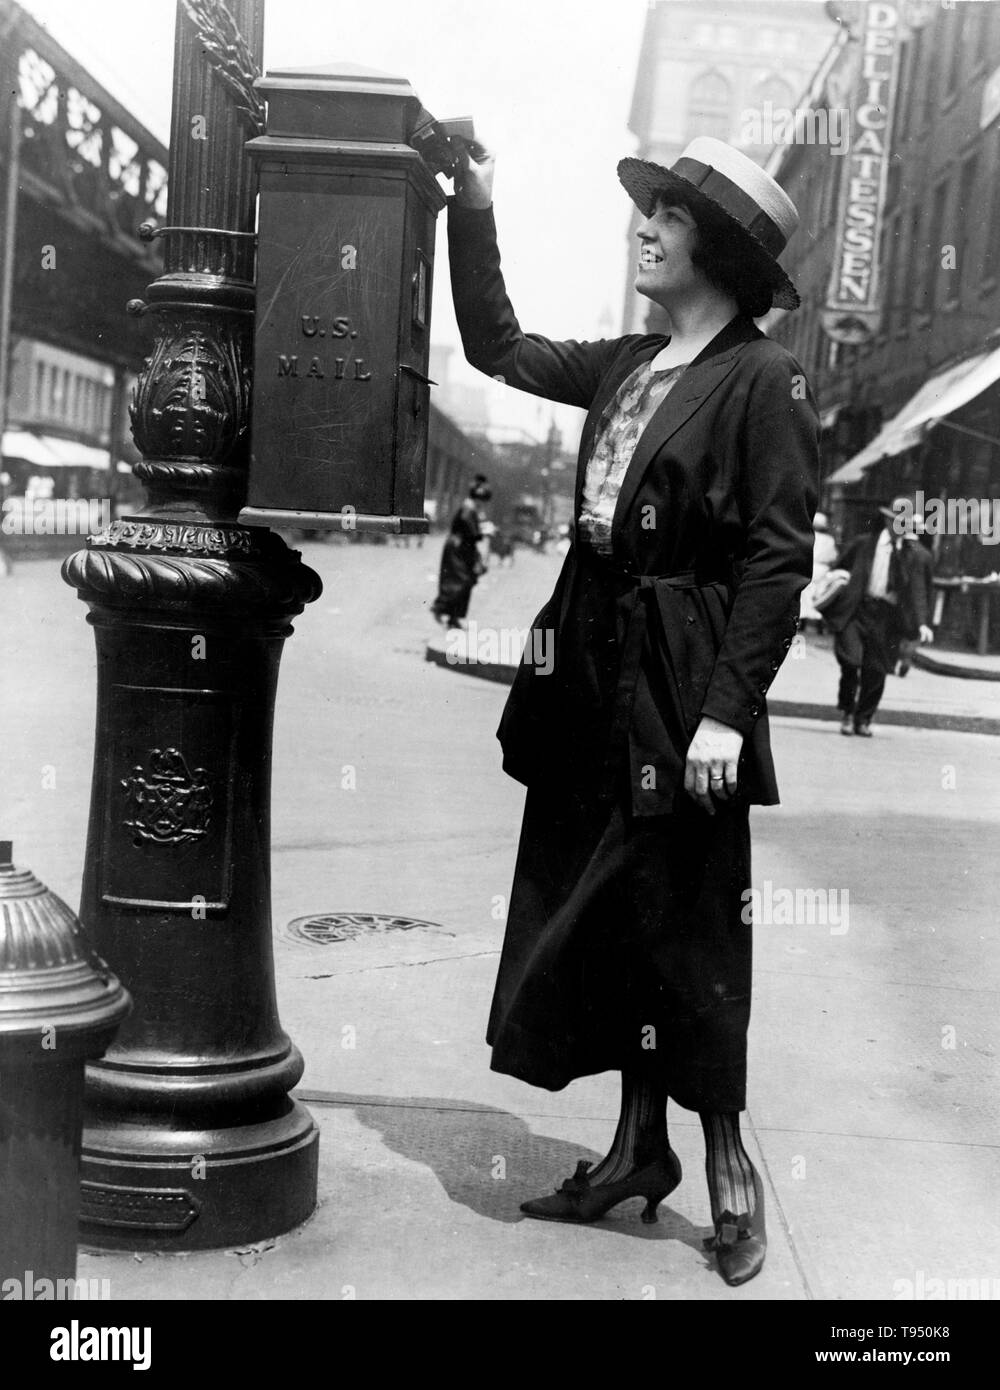 Entitled: 'Merle Alcock (Metropolitan Opera contralto) mailing a letter in New York City' shows a woman putting a letter in a U.S. Mailbox attached to a post on a street corner. A post box, also known as a collection box, mailbox, letter box or drop box is a physical box into which members of the public can deposit outgoing mail intended for collection by the agents of a country's postal service. Stock Photo